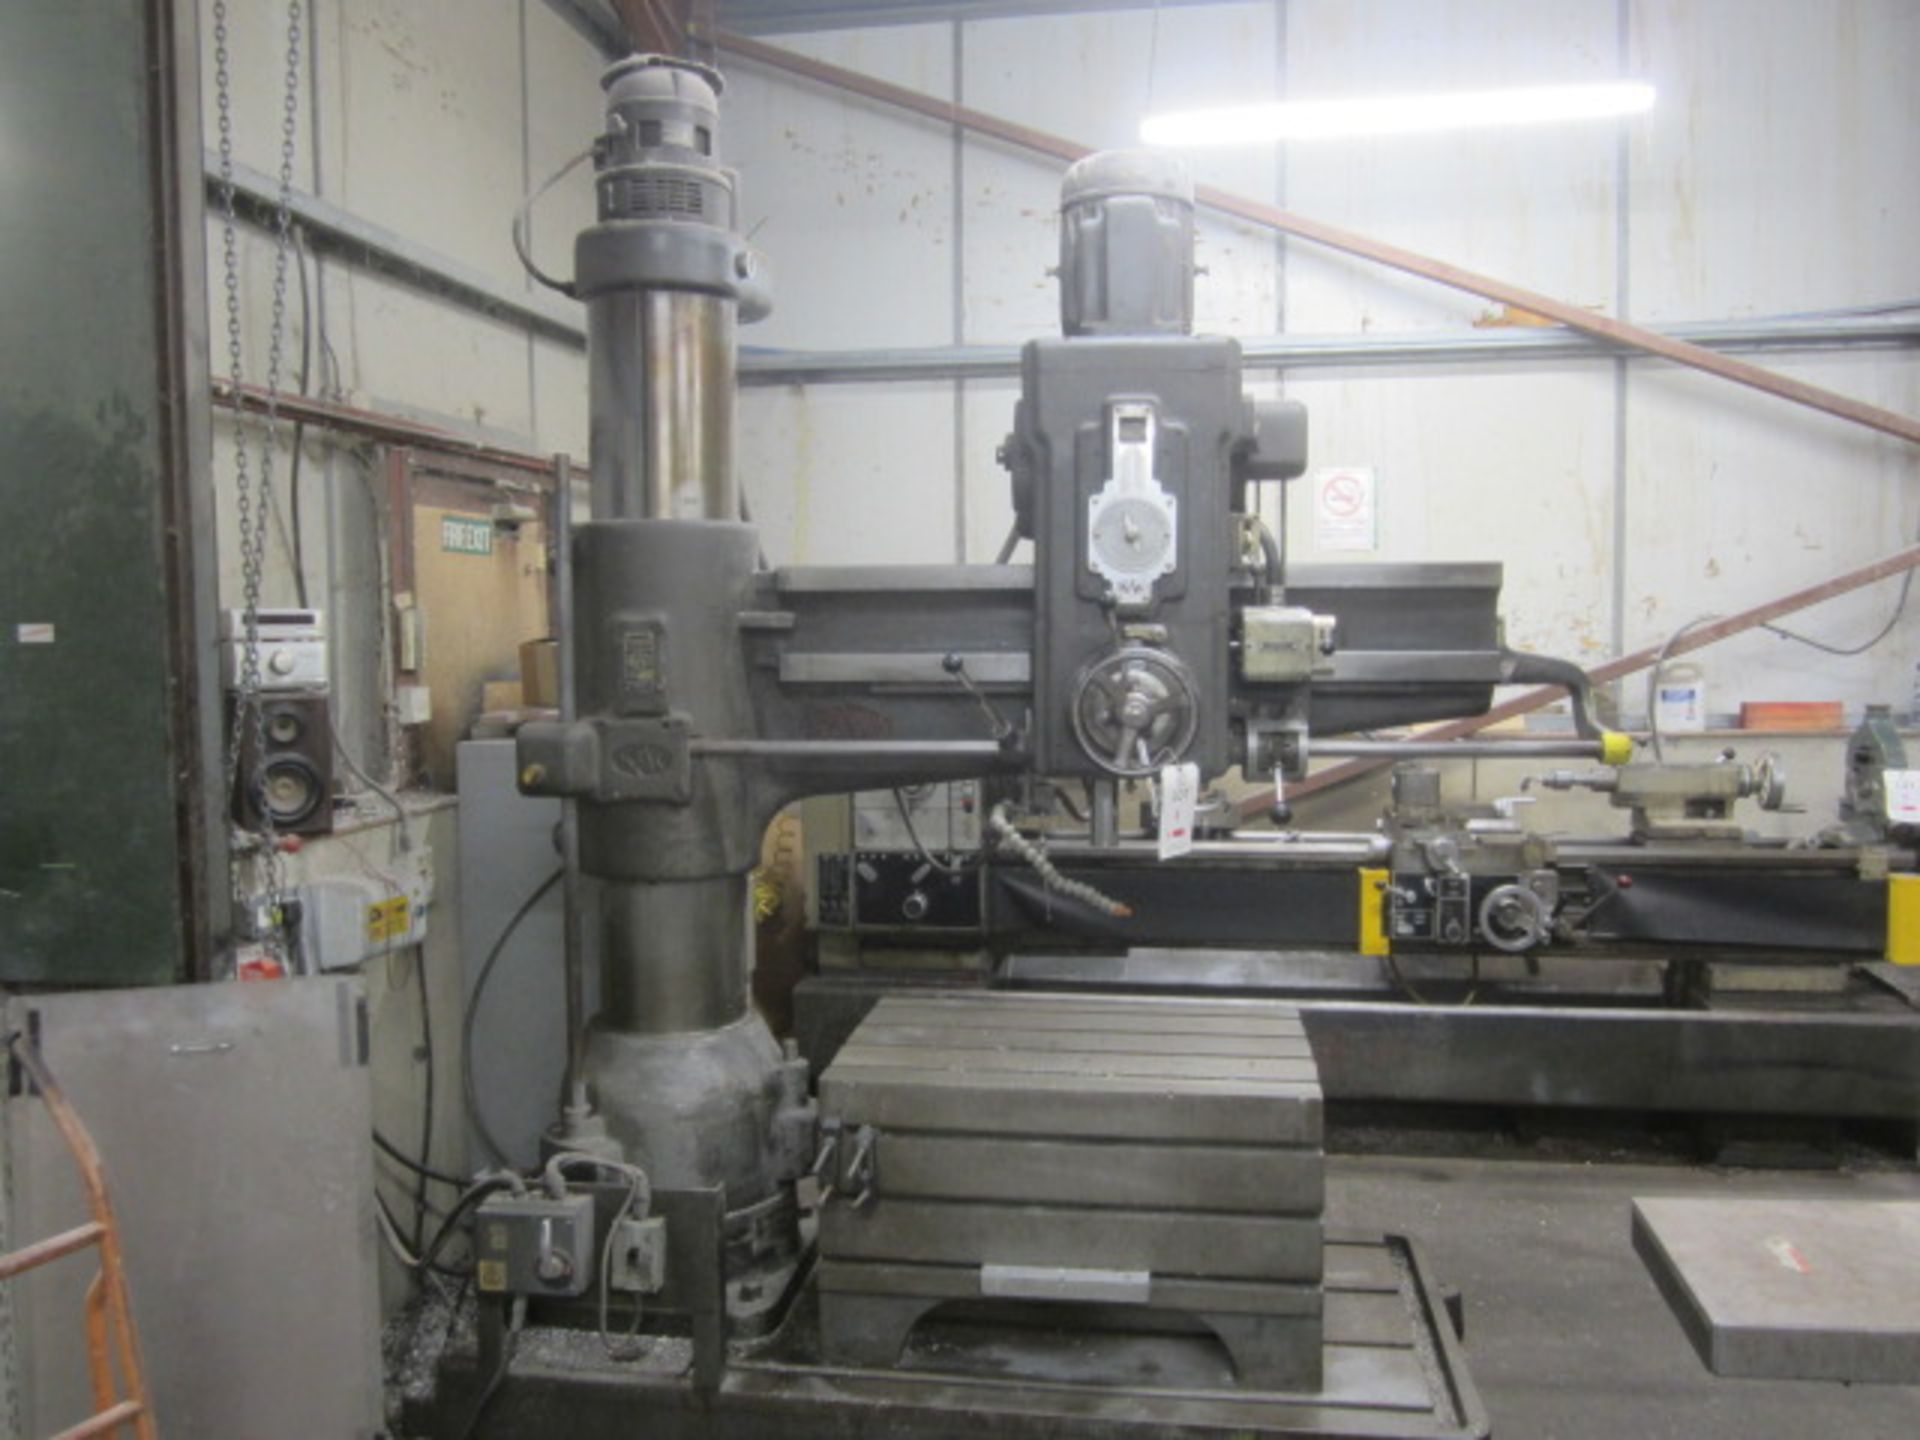 Kitchen & Walker E26 elevating column radial arm drill, serial no. 16981, circa 48" swing, with